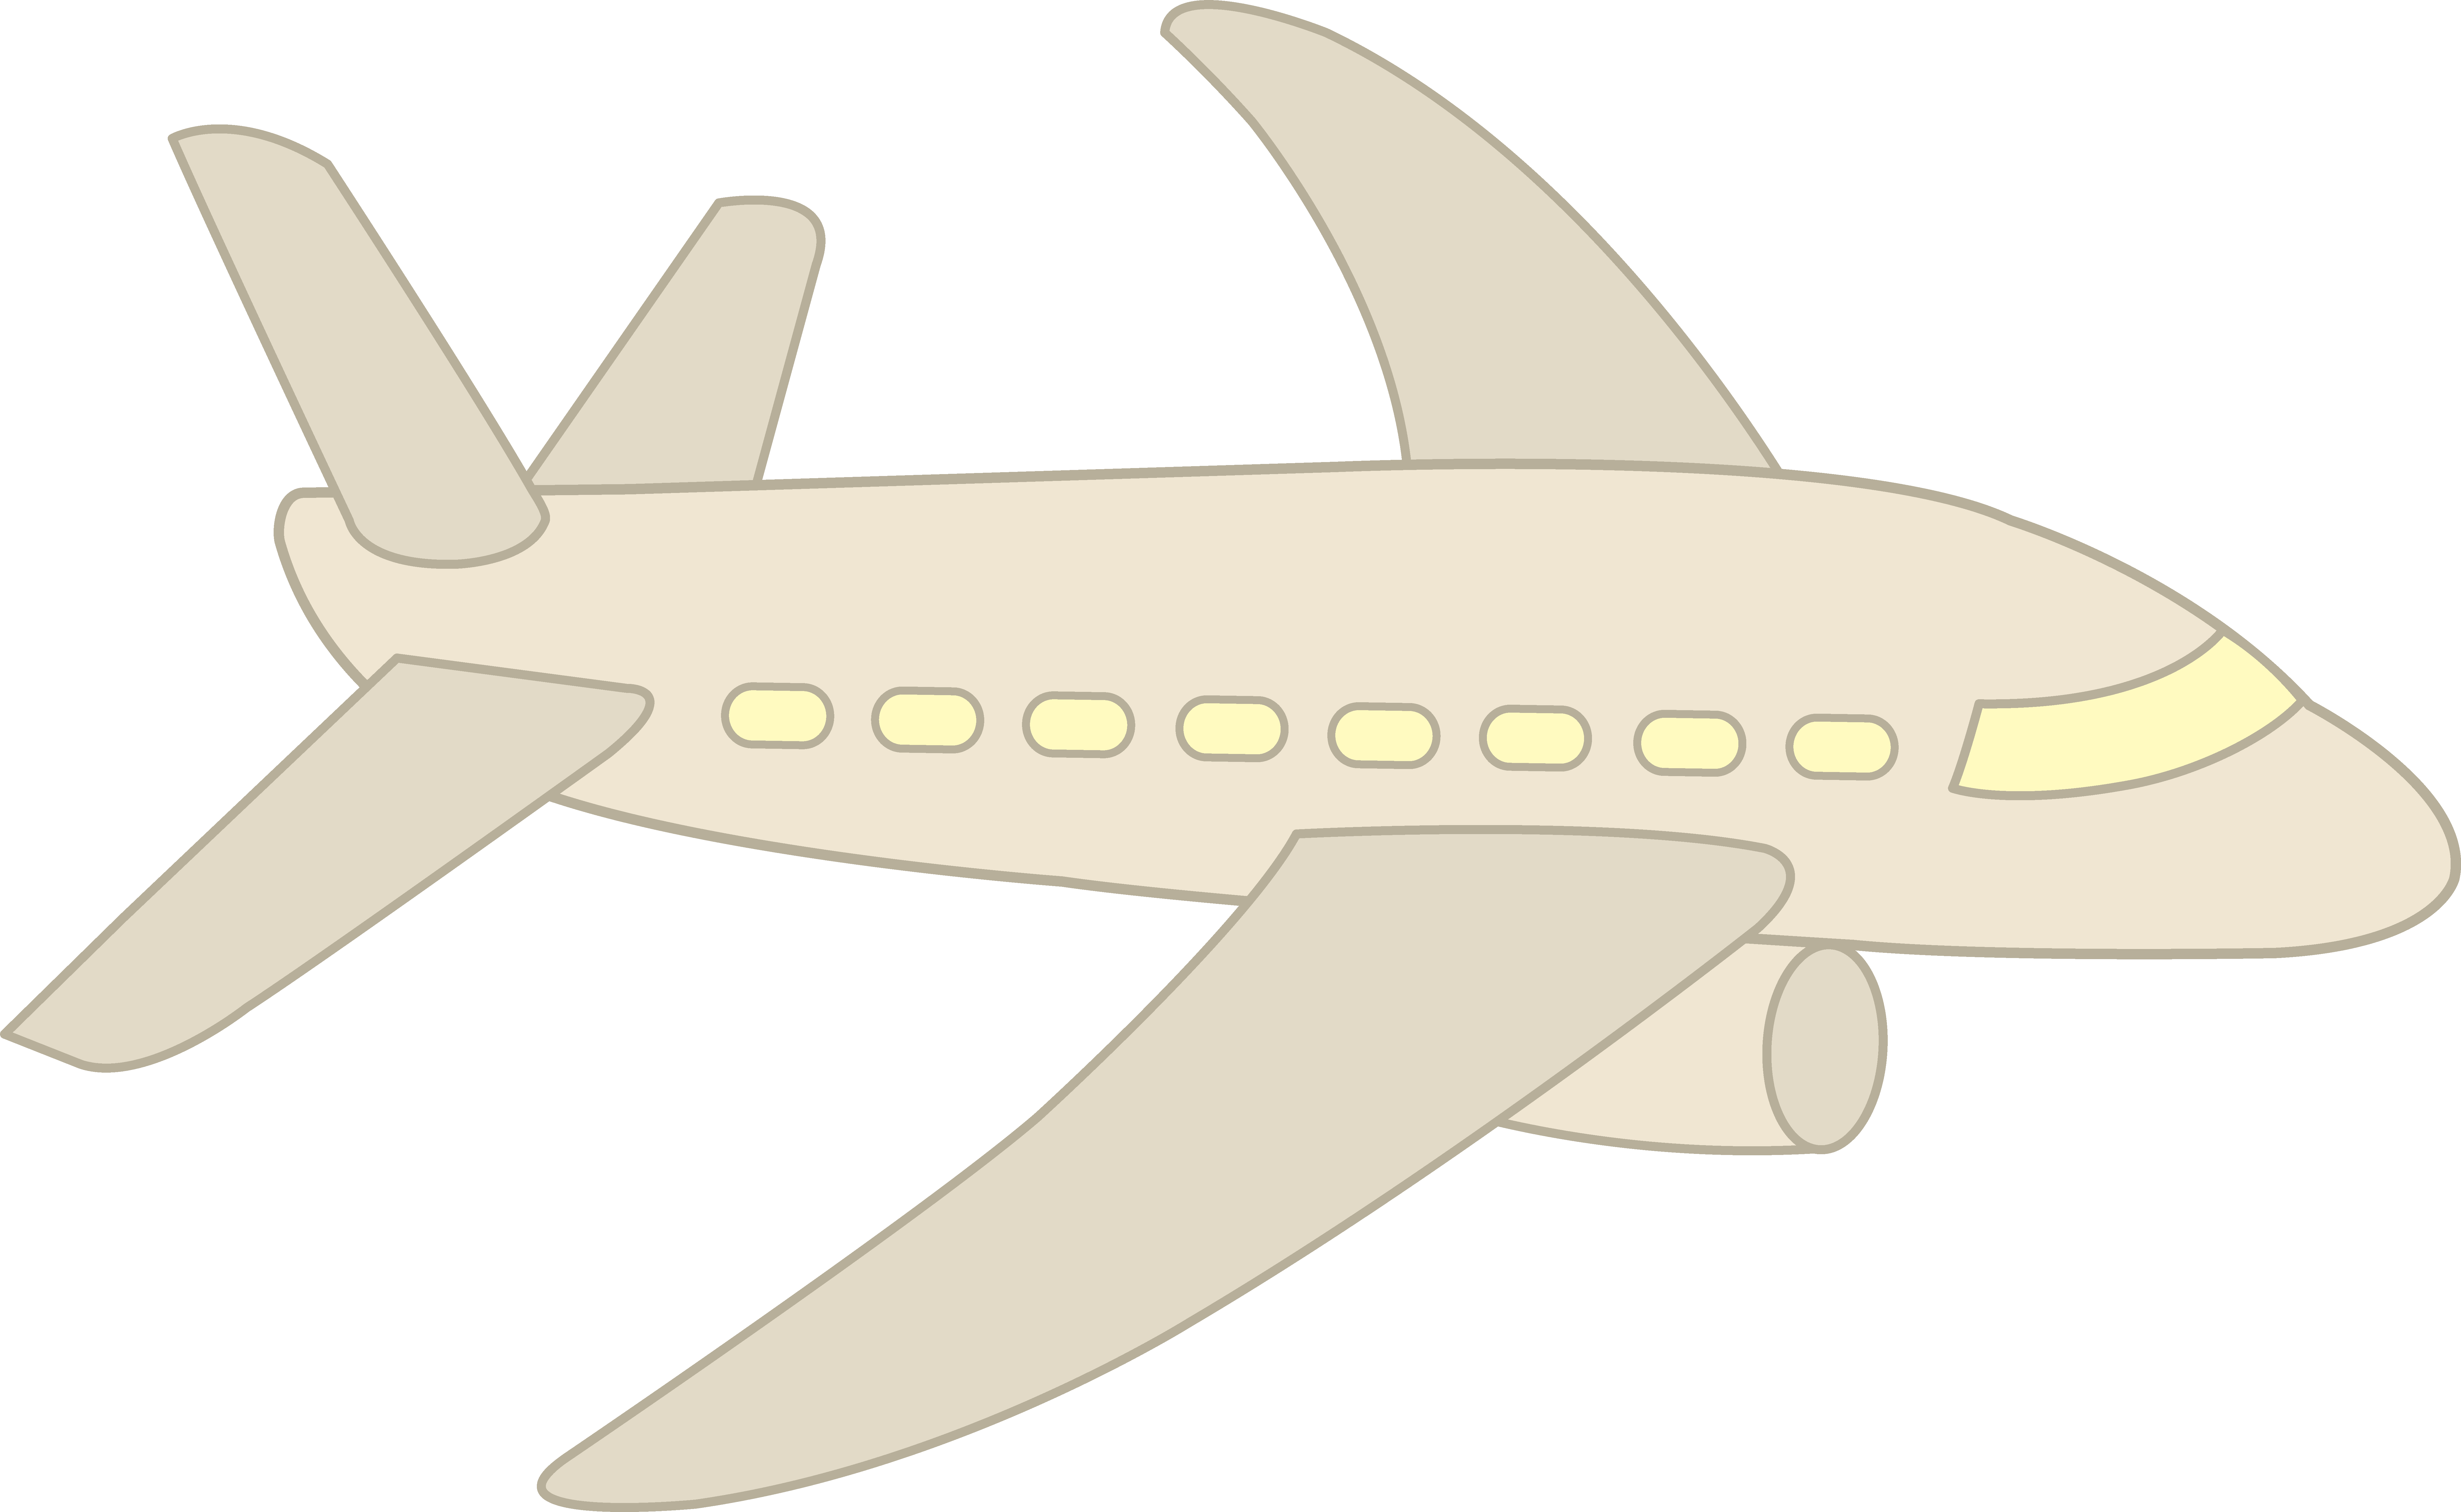 Clipart White Airplane Simple Free Clip - Clipart White Airplane Simple Free Clip (8994x5527)